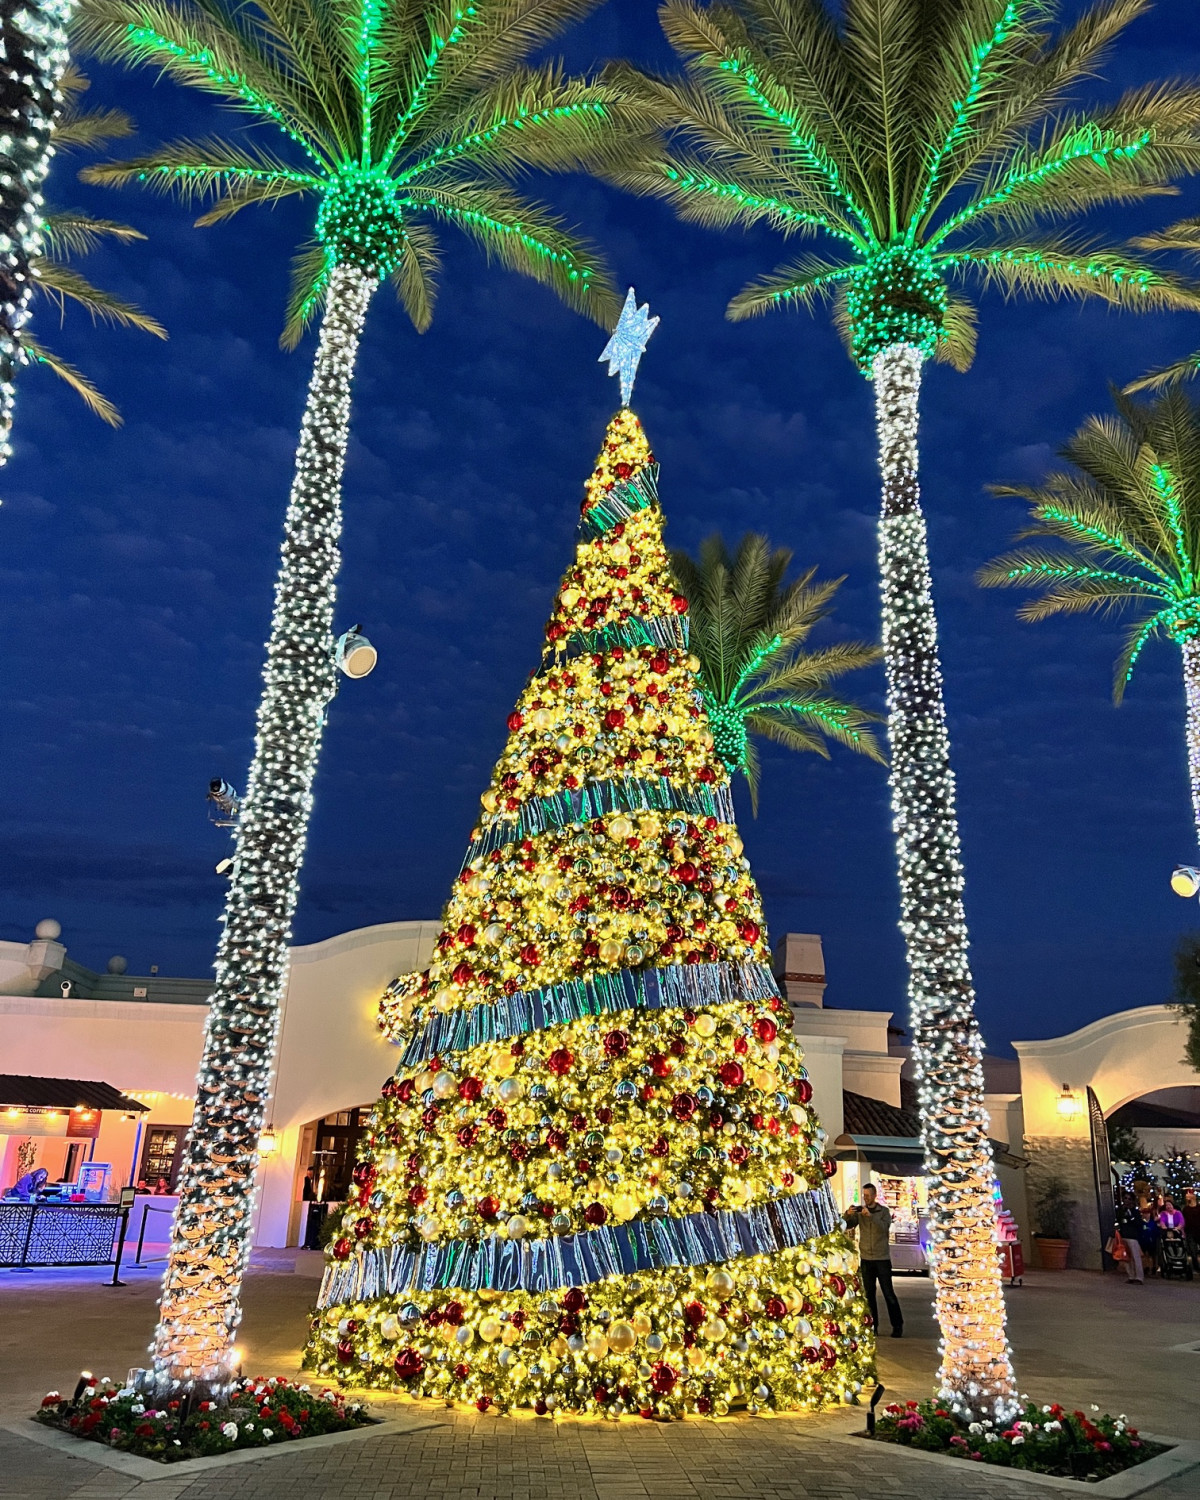 A lit up Christmas tree with palm trees on a beautiful evening 